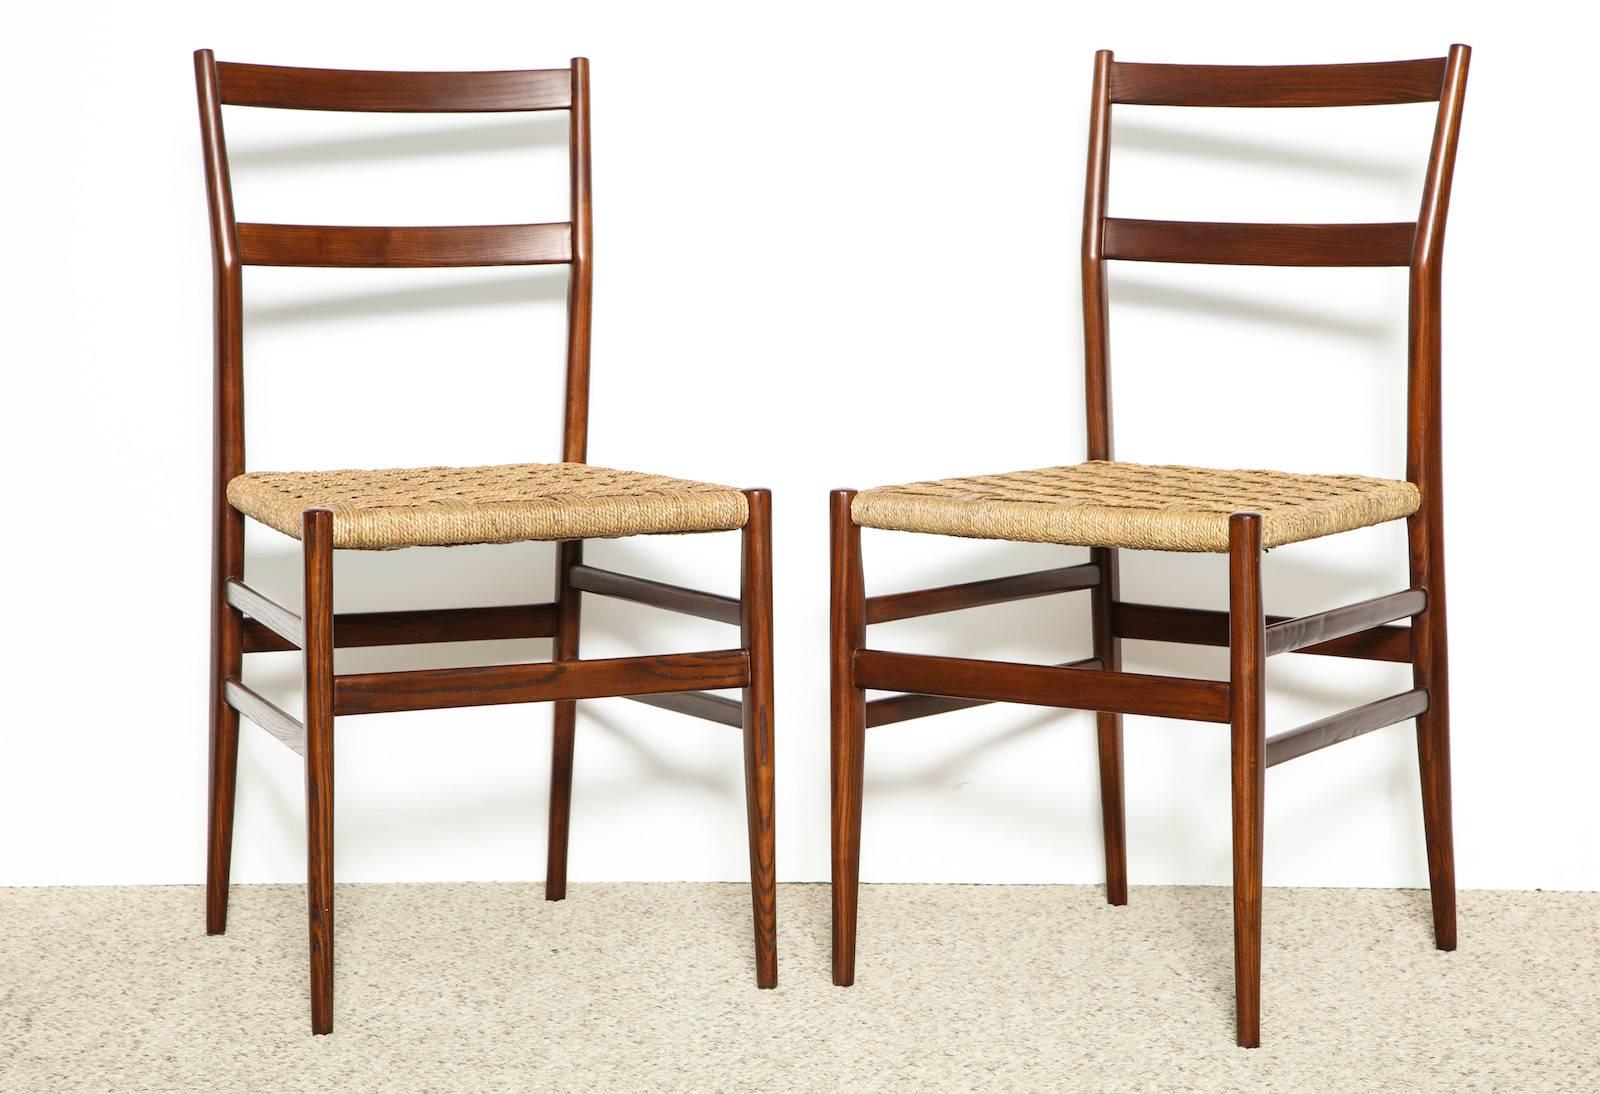 Set of 10 superleggera chairs by Gio Ponti for Cassina. These iconic chairs are one of his most famous models. Sculptural frame of solid ash, with woven seats and slatted backs. Set of ten side chairs with newly woven seats. *Currently only four